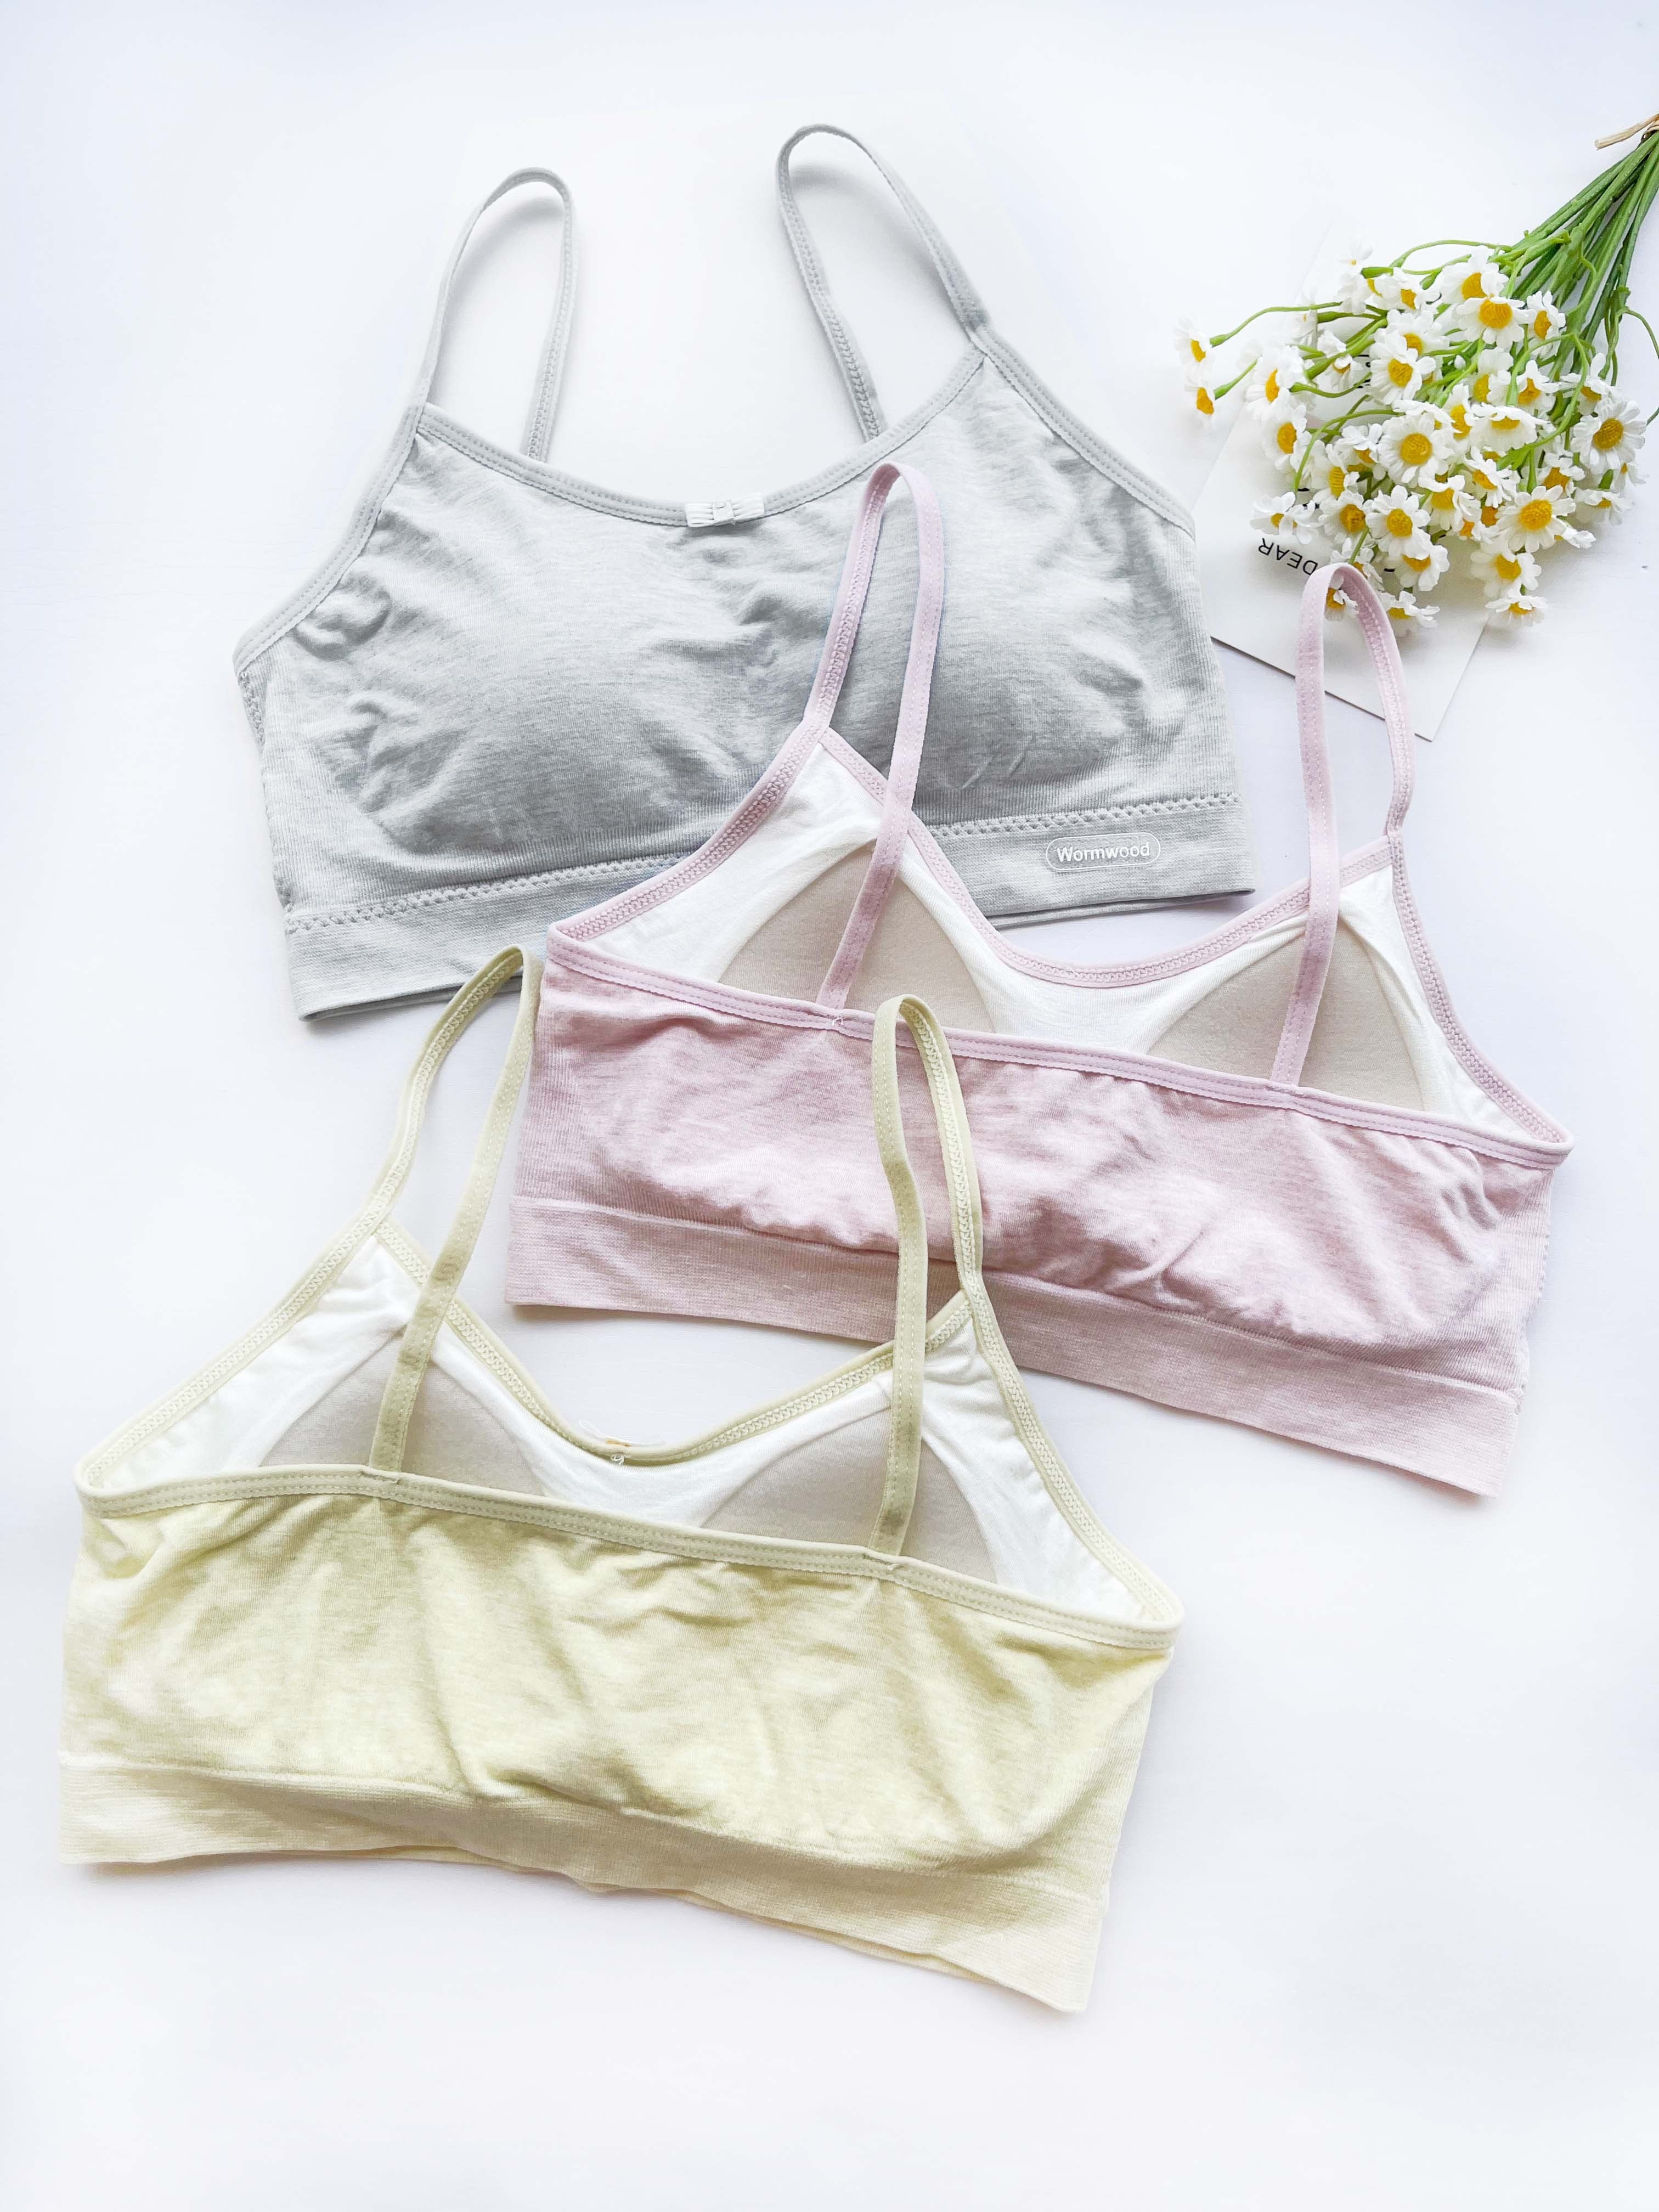 Introducing our Valentine's Day wireless bras, perfect for all